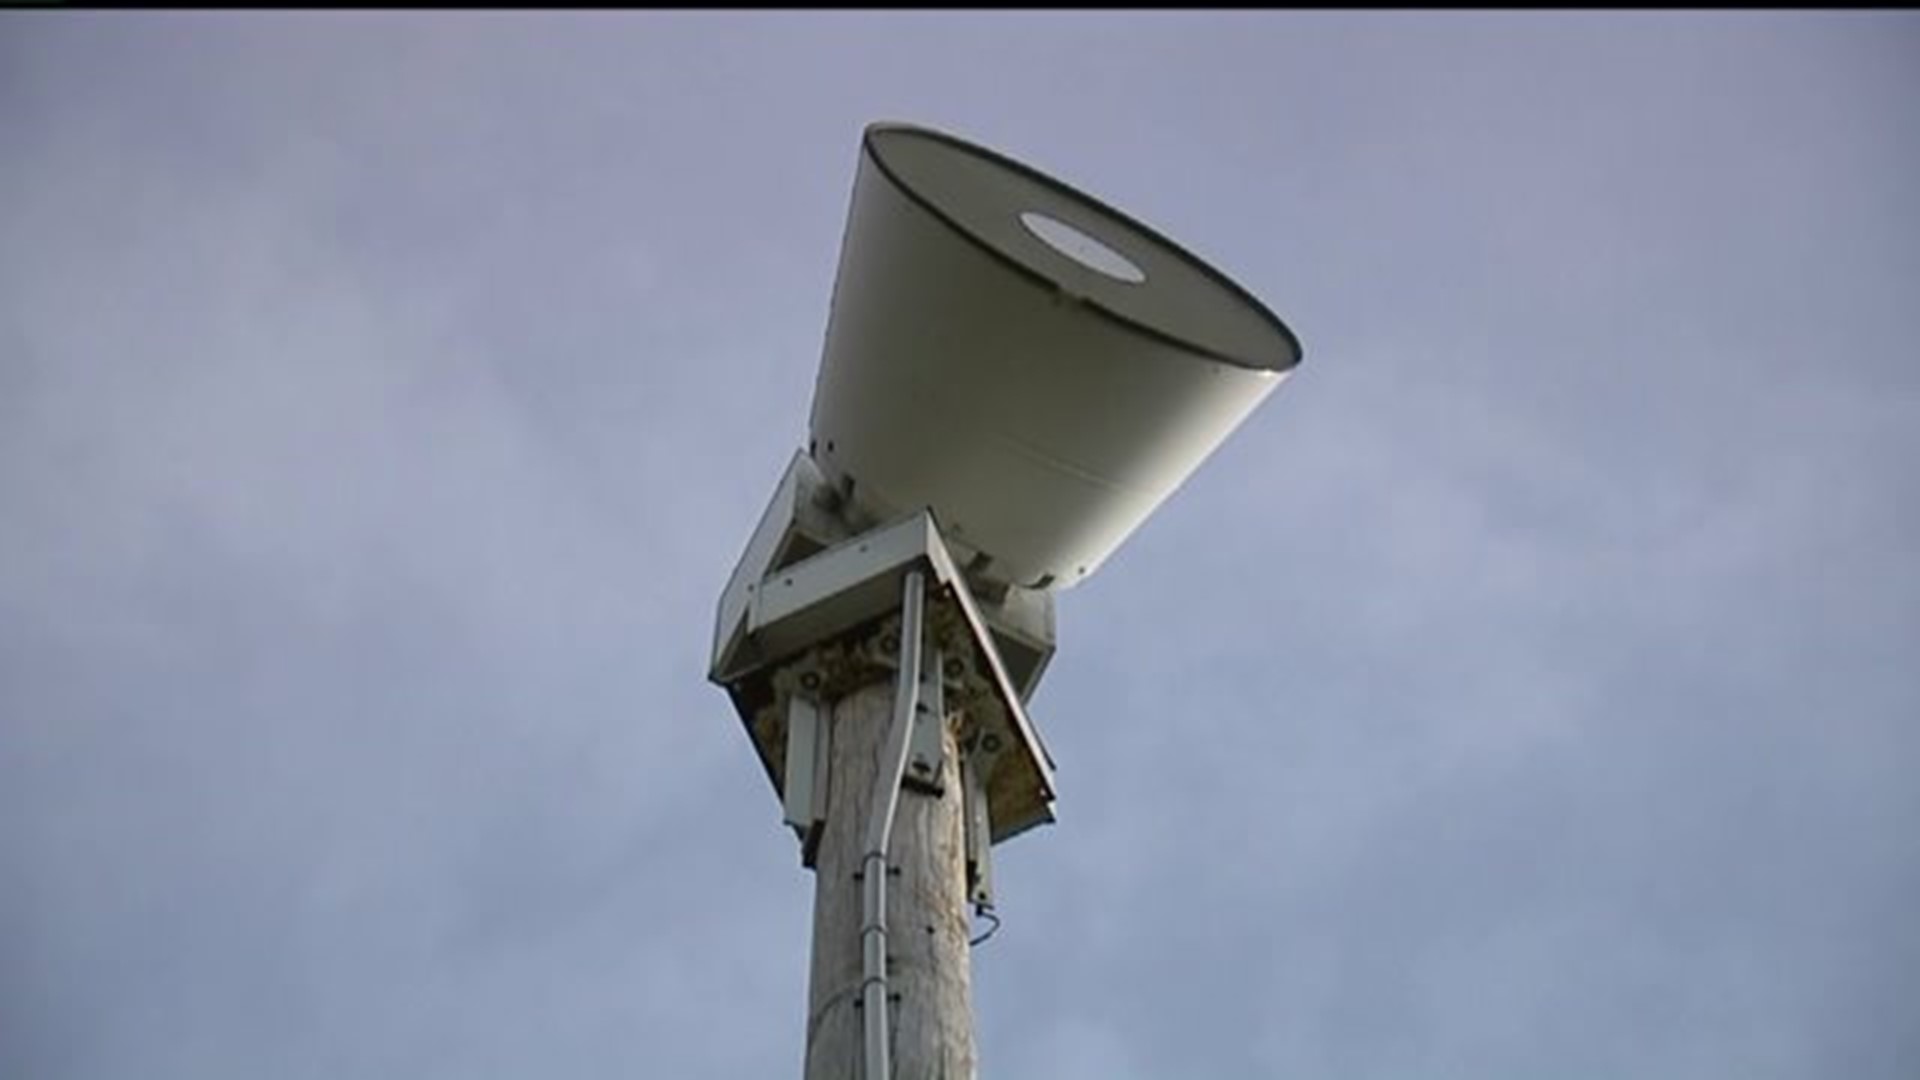 The drill was a part of Severe Weather Awareness Week in the state.